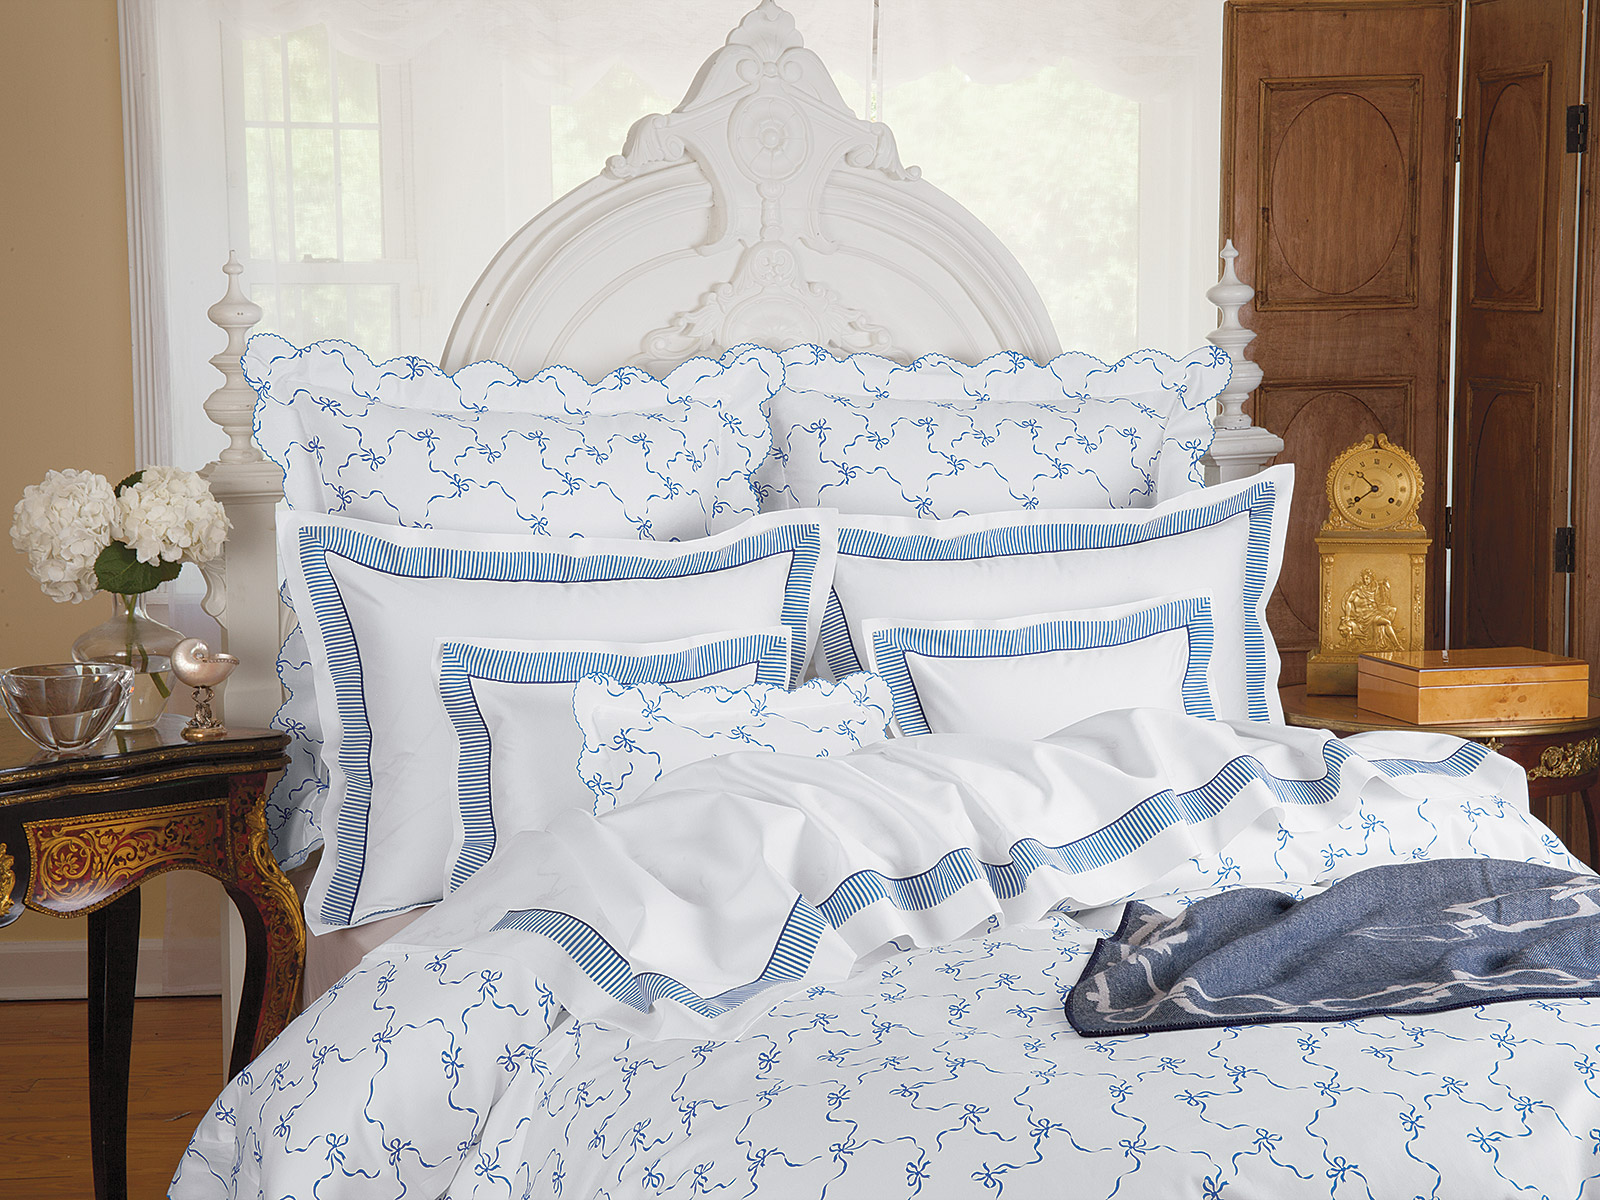  image of a Tres Jolie bed linens